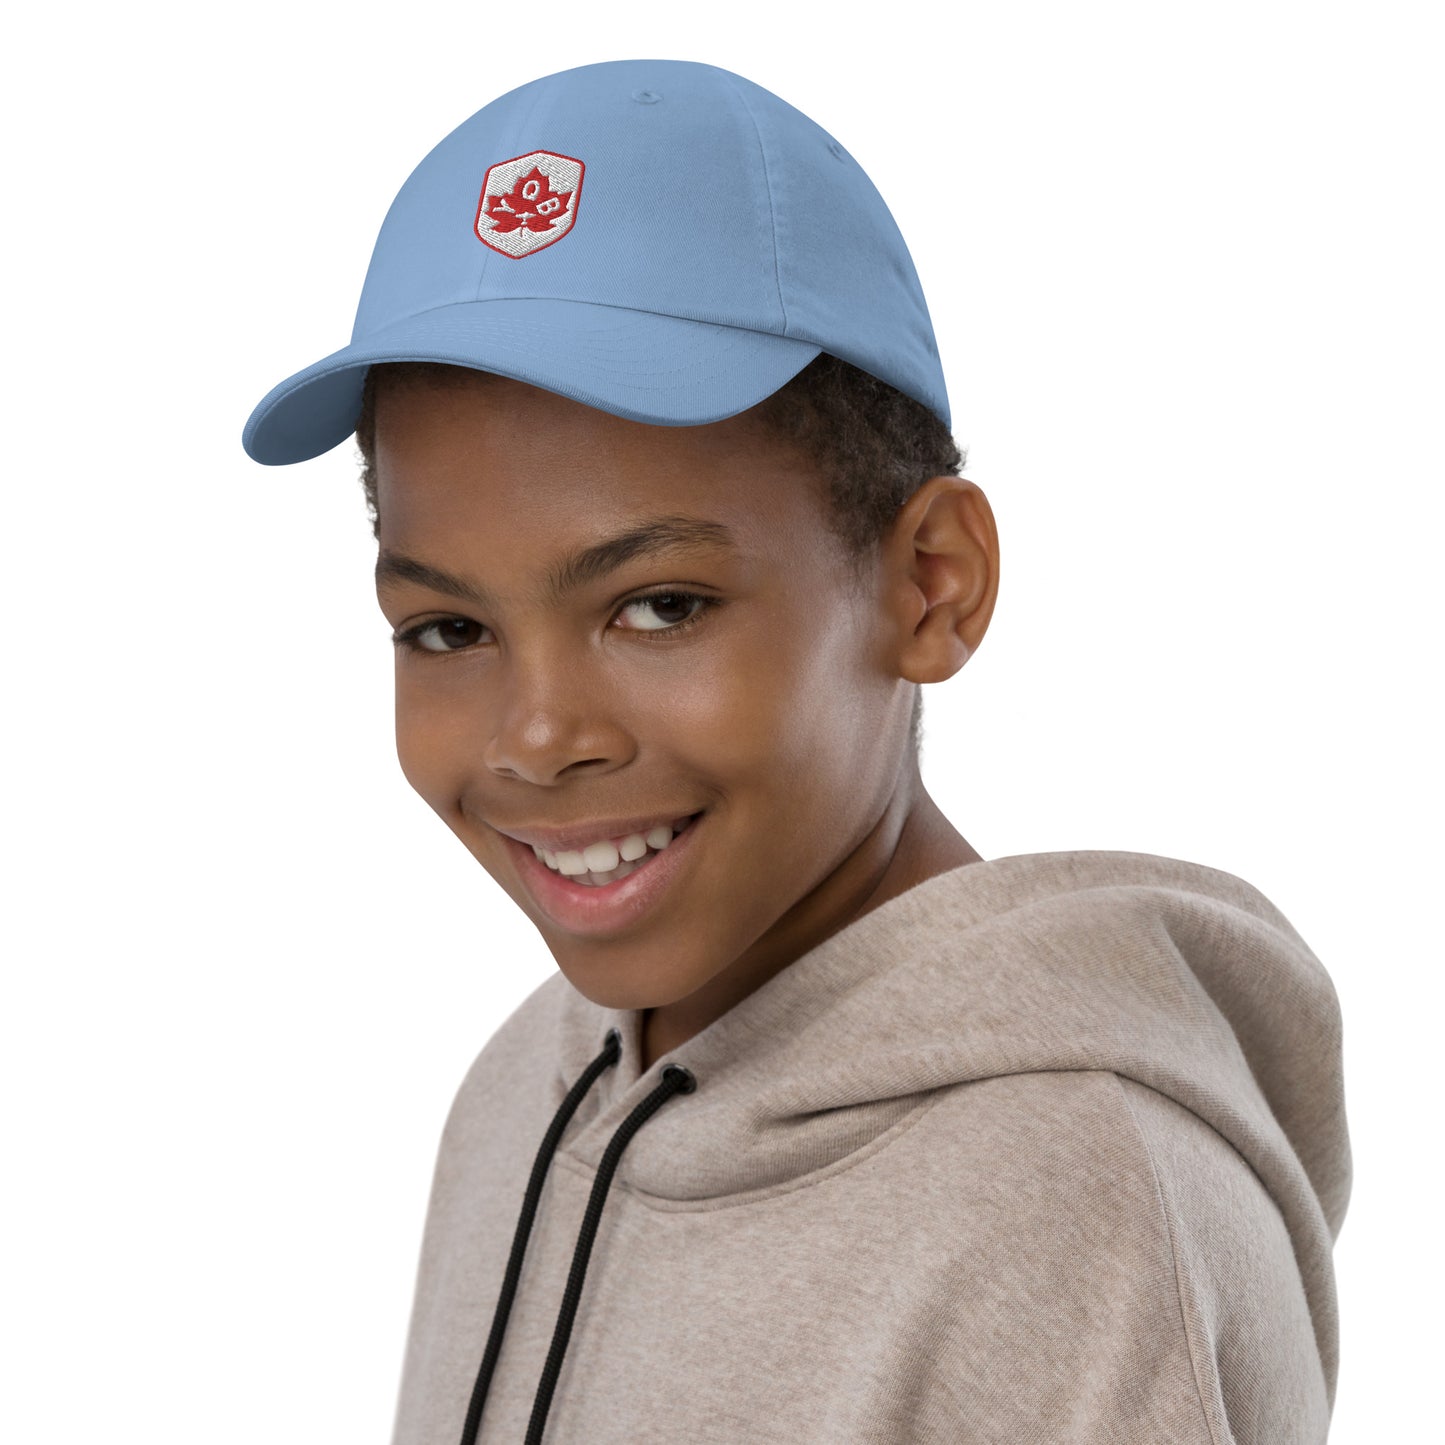 Maple Leaf Kid's Cap - Red/White • YQB Quebec City • YHM Designs - Image 06